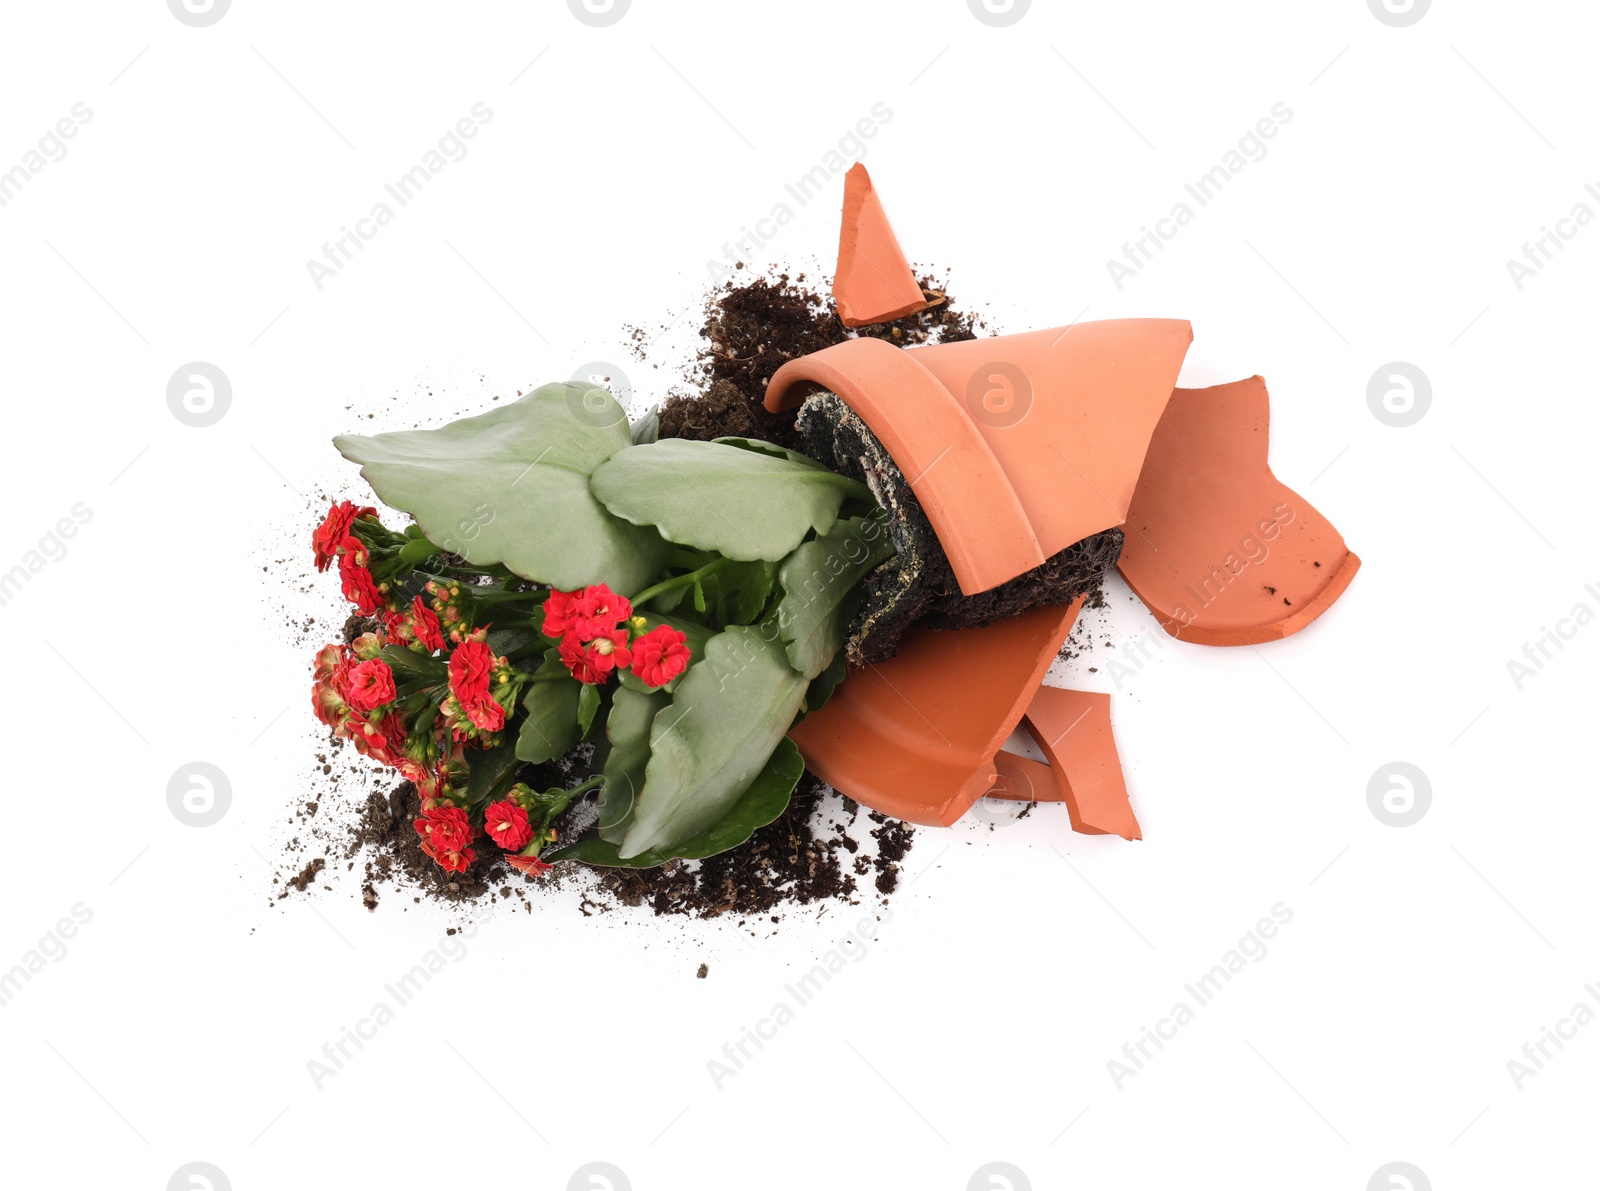 Photo of Broken terracotta flower pot with soil and kalanchoe plant on white background, top view